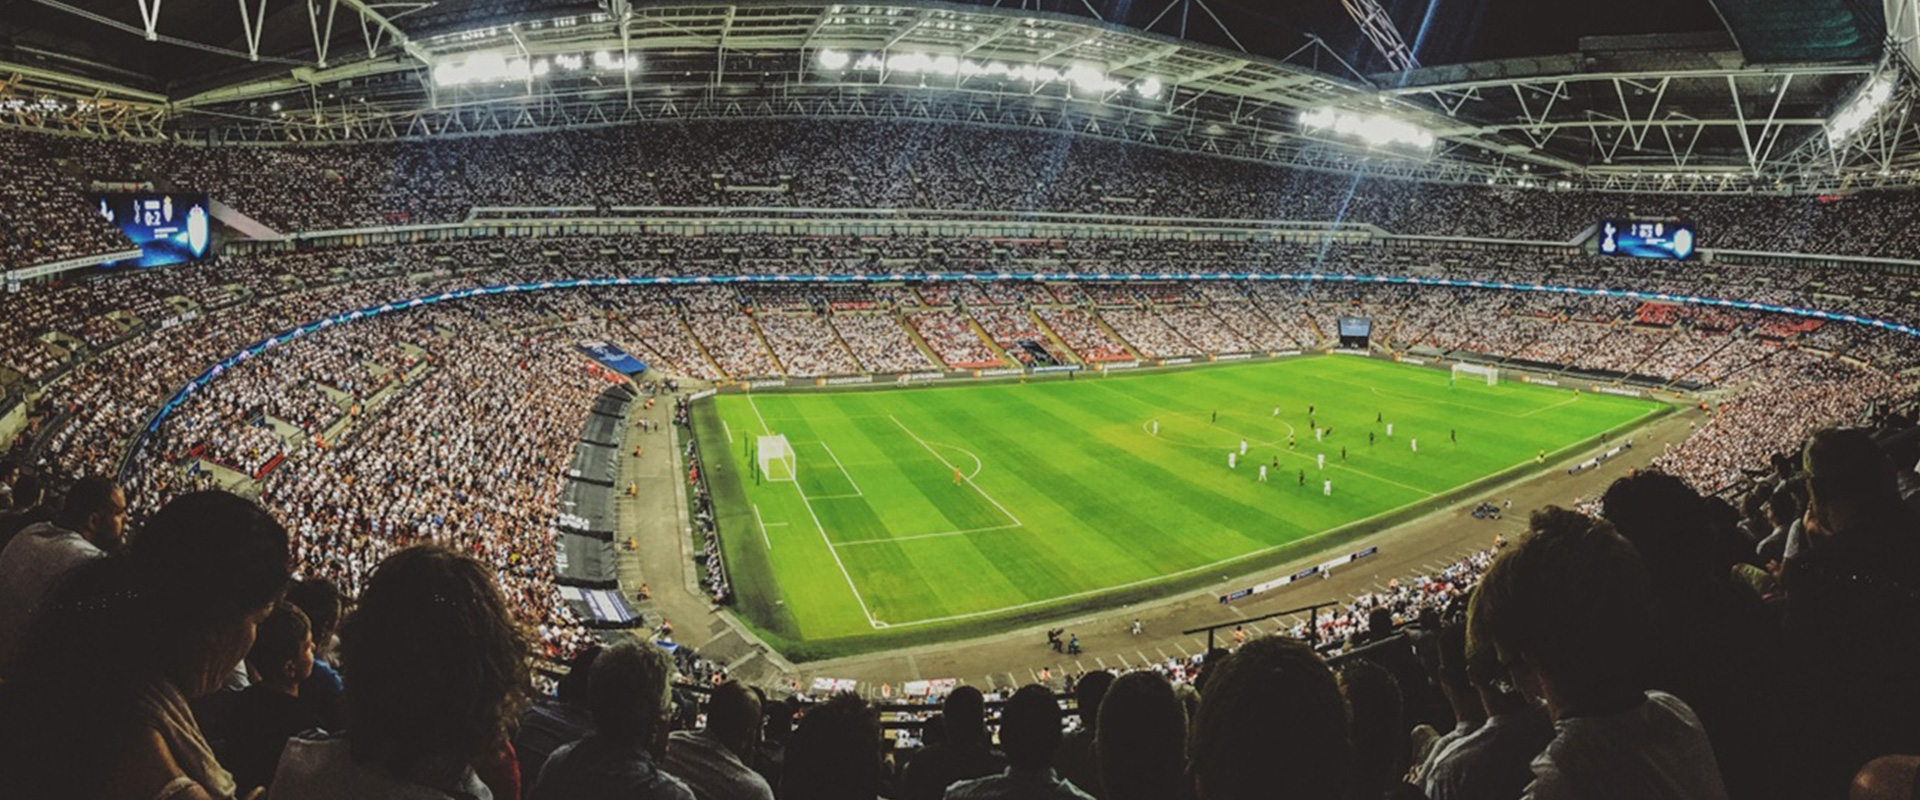 Digital Advertising Case Study - Sporting Event